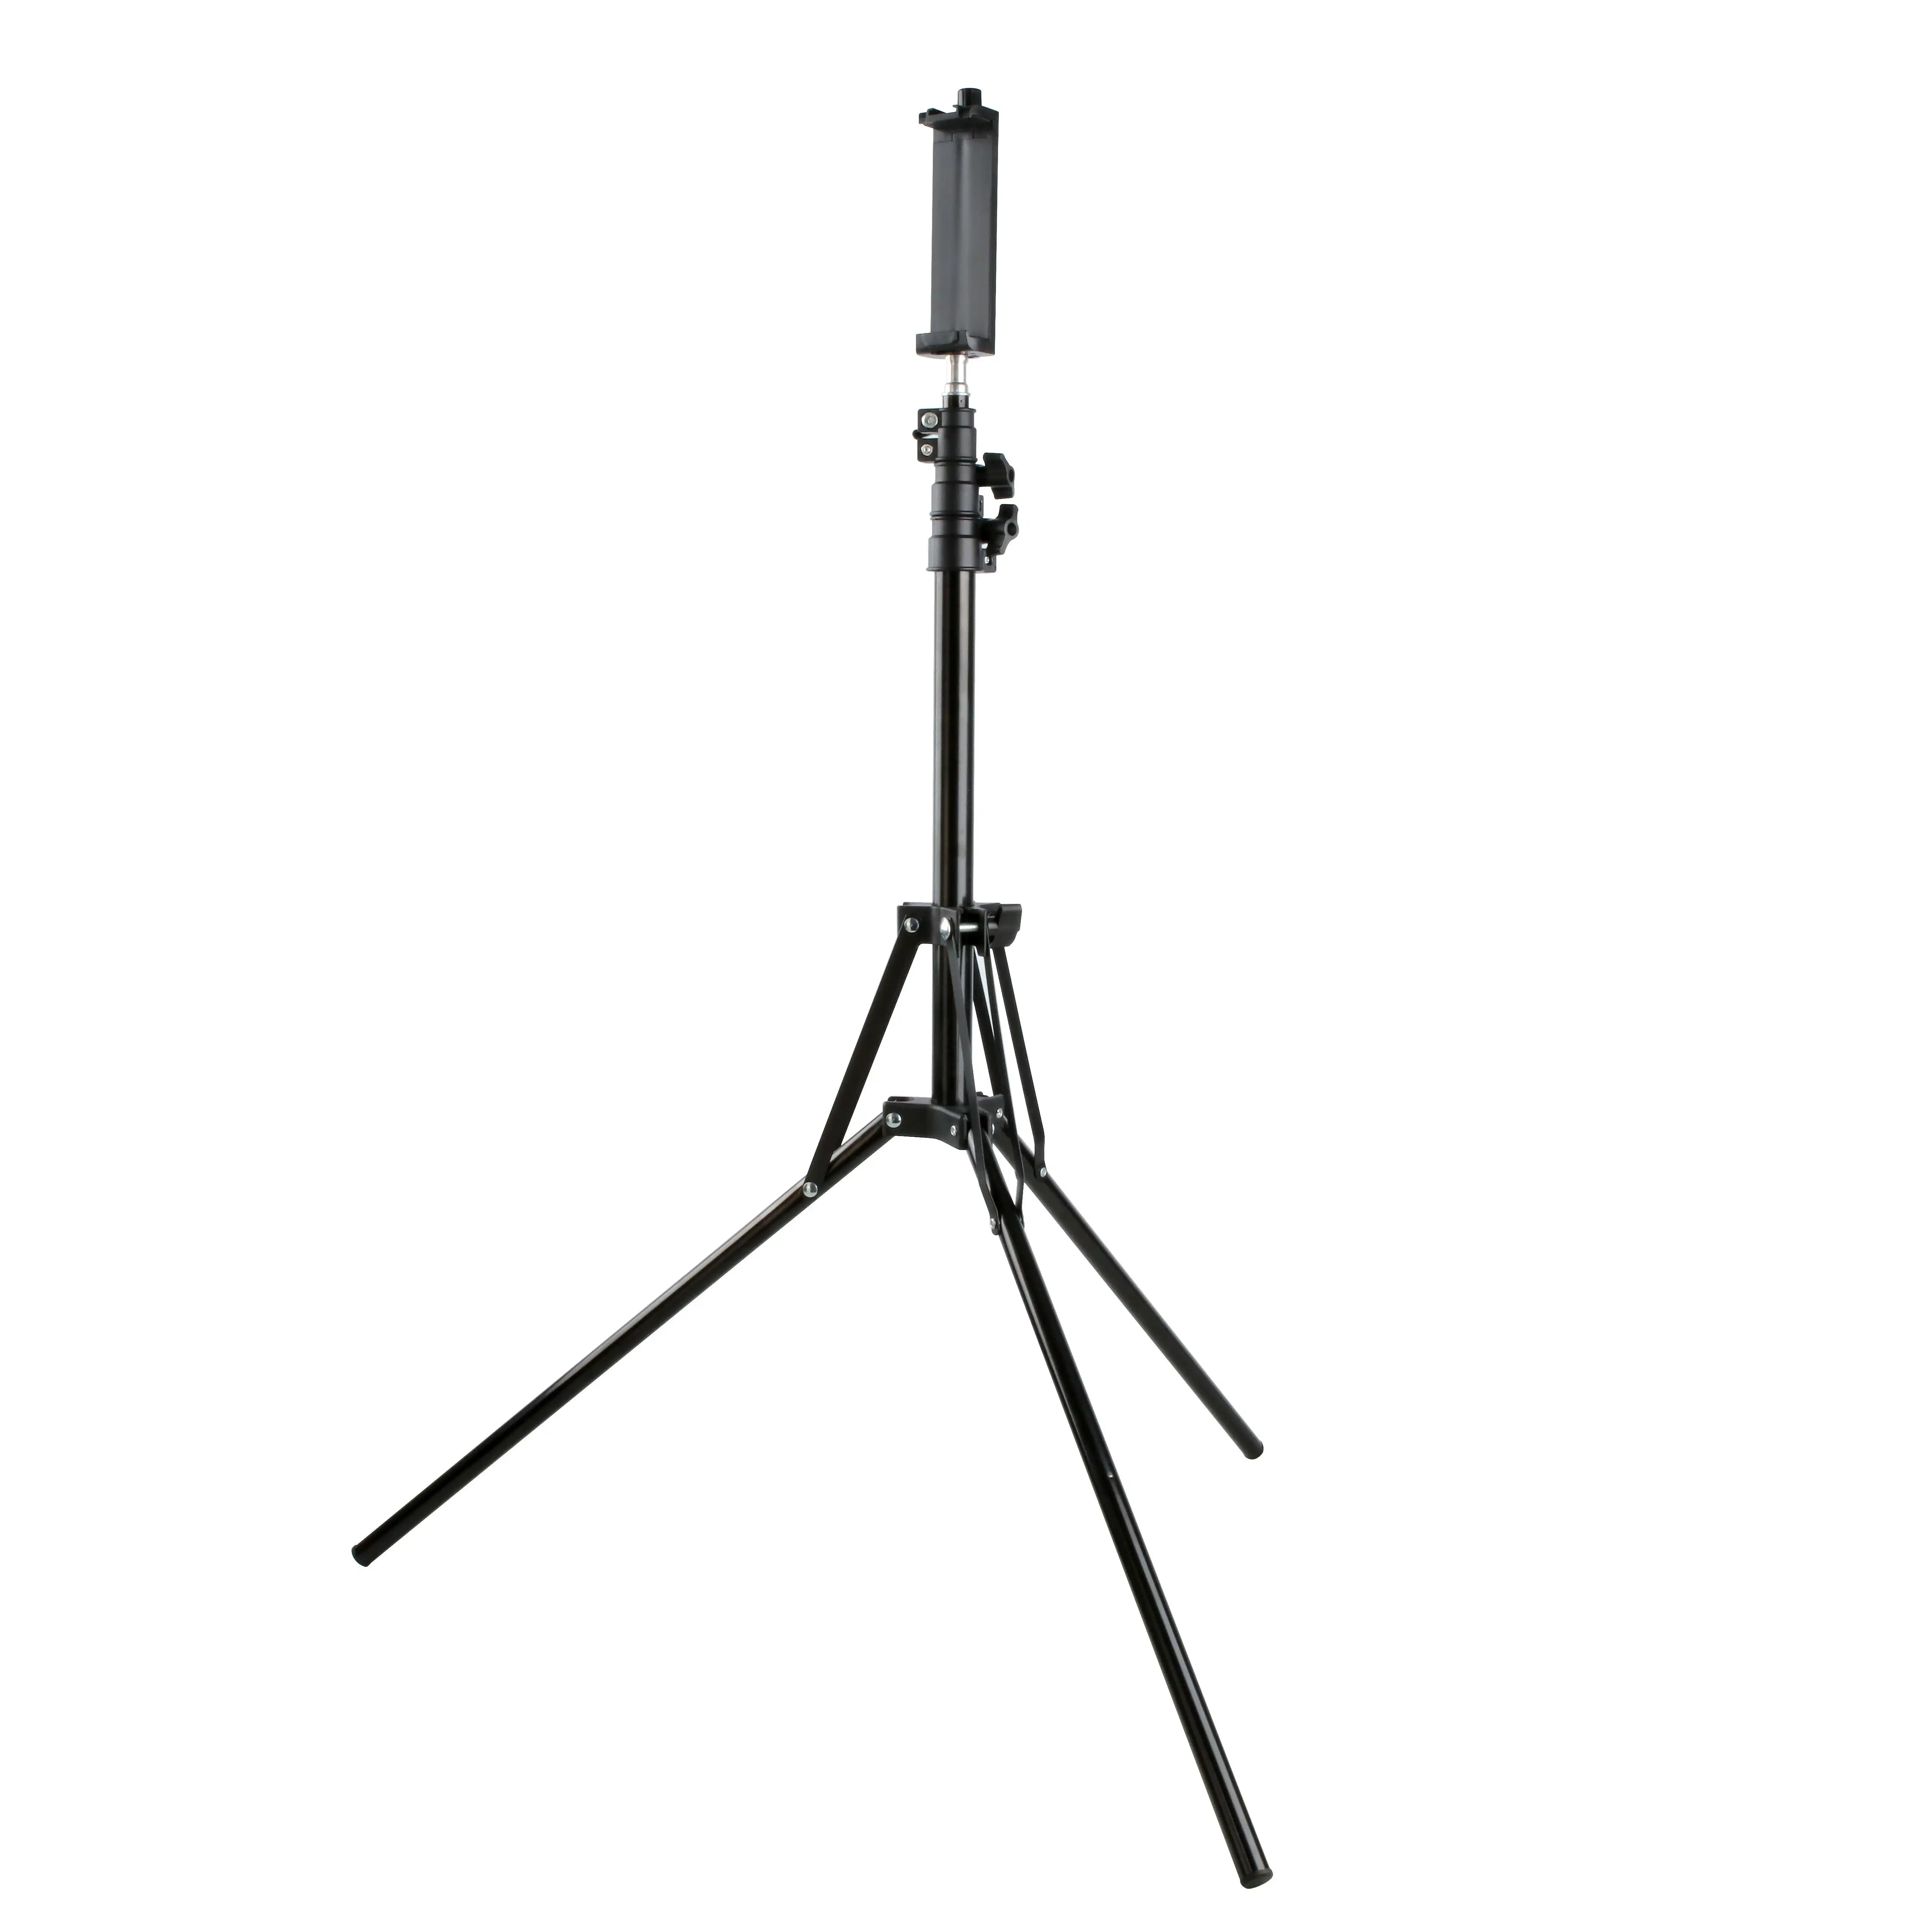 Retractable Tripod - Phone/Tablet Stand Indoor Outdoor Holder Included